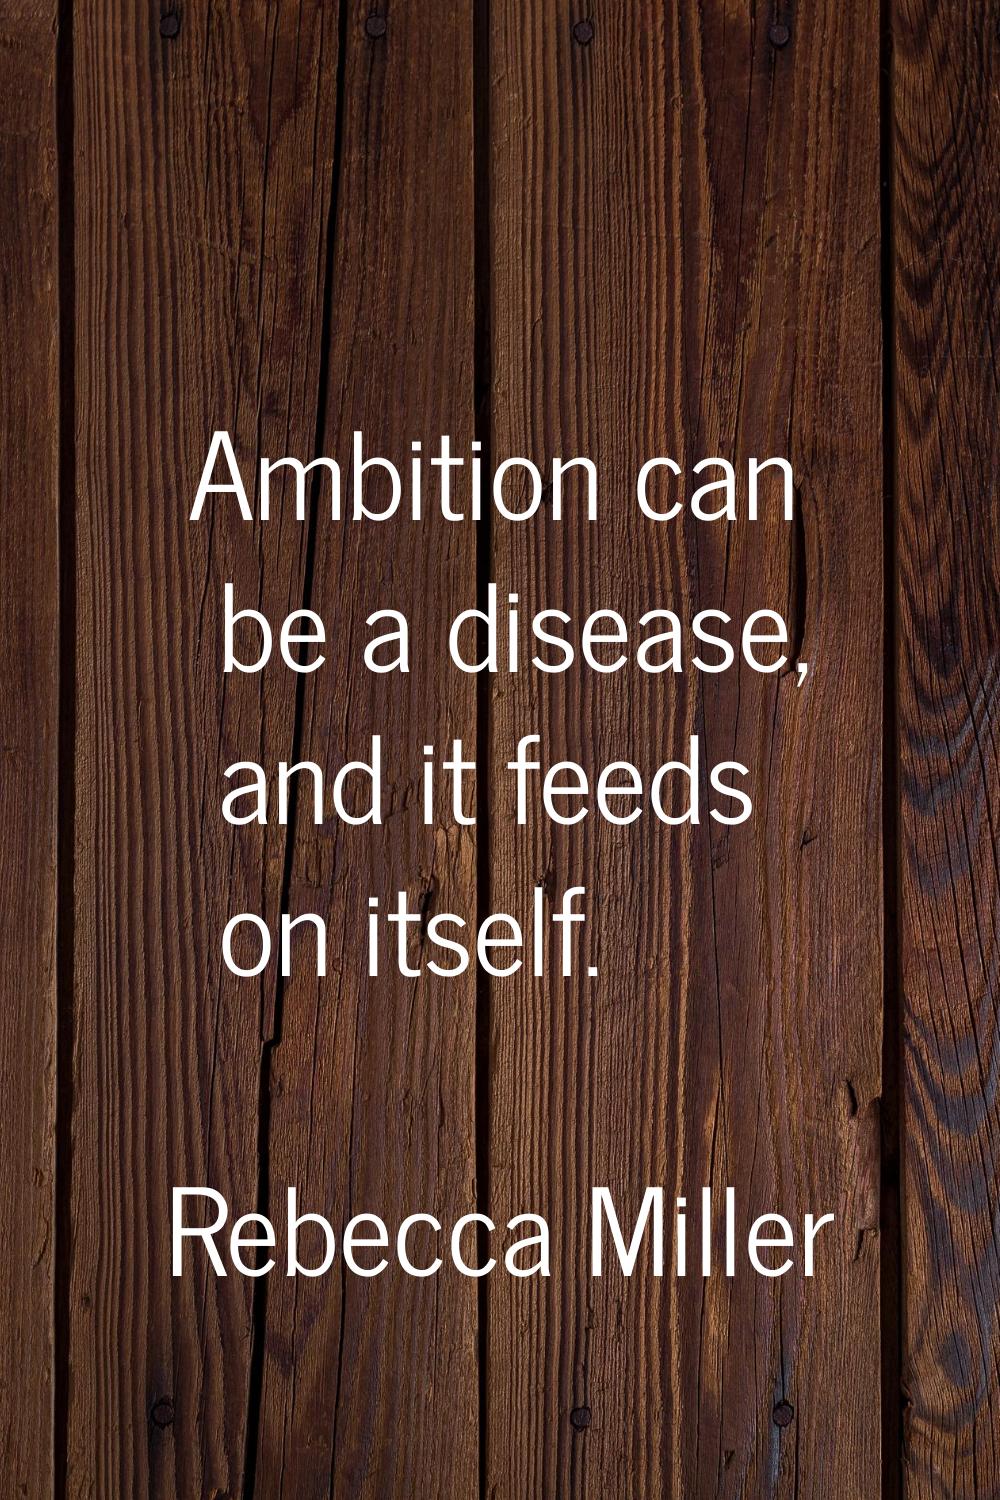 Ambition can be a disease, and it feeds on itself.